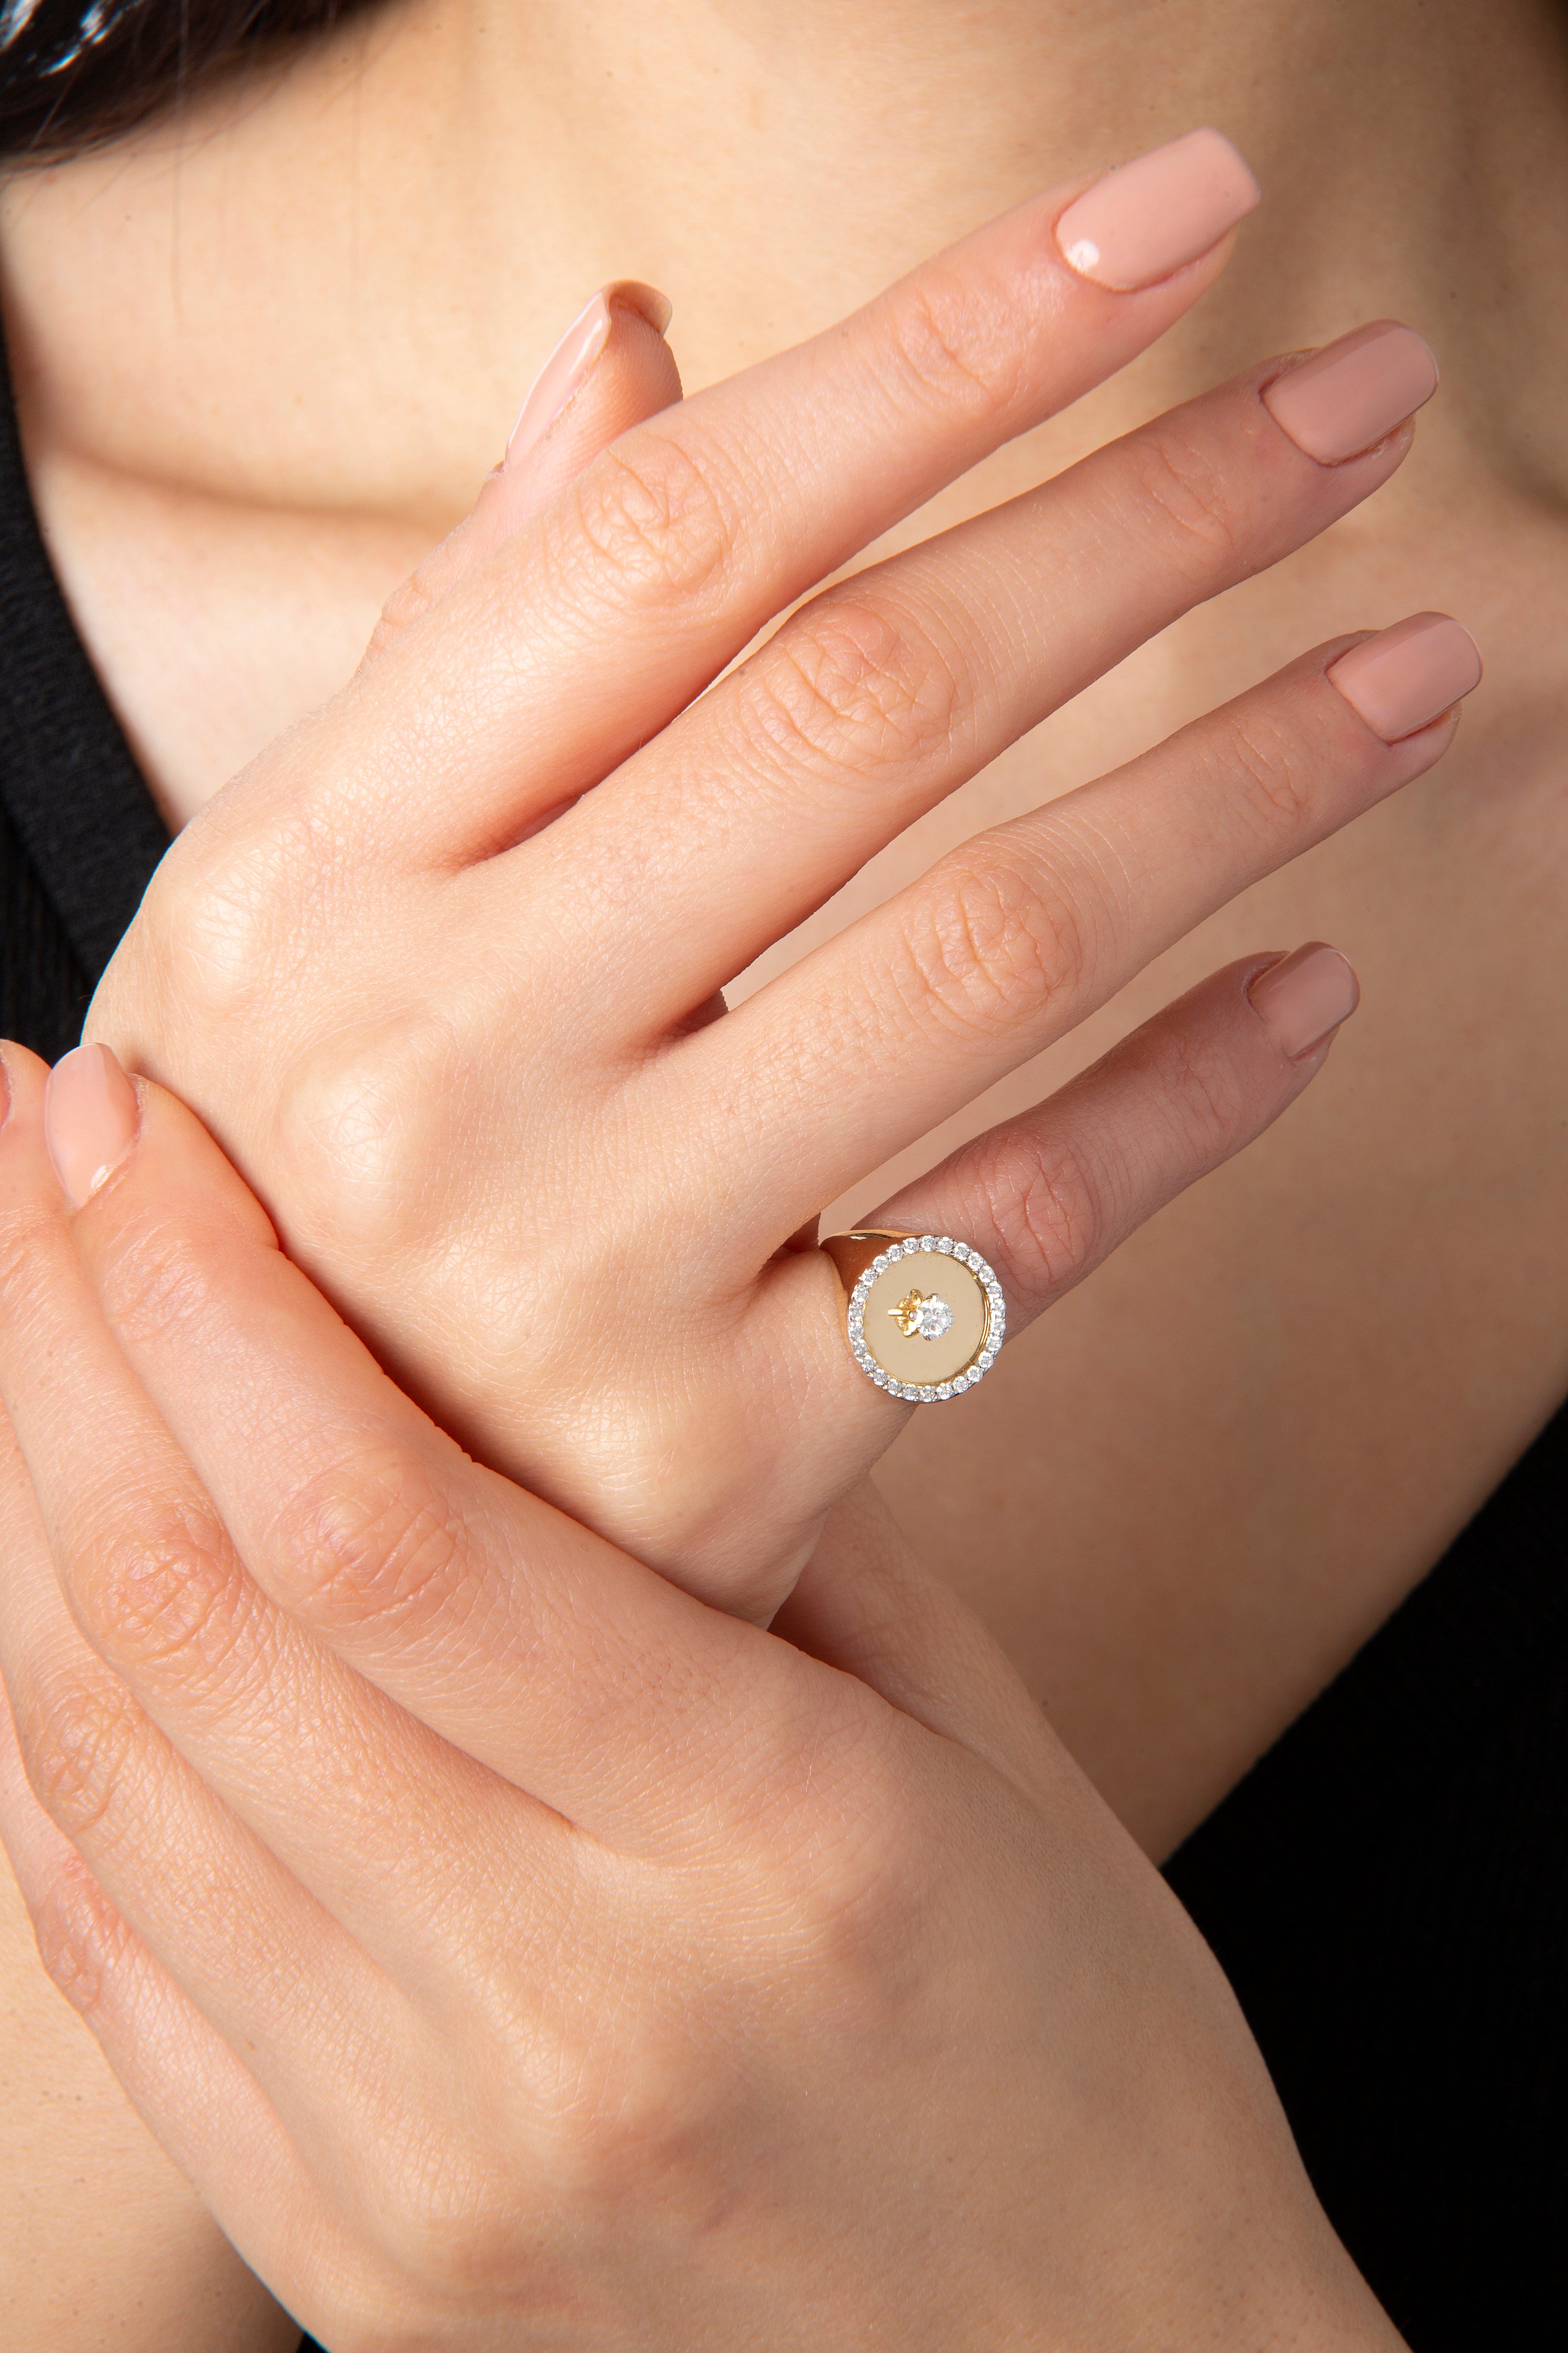 Precious Mom Ring in Yellow Gold - Her Story Shop